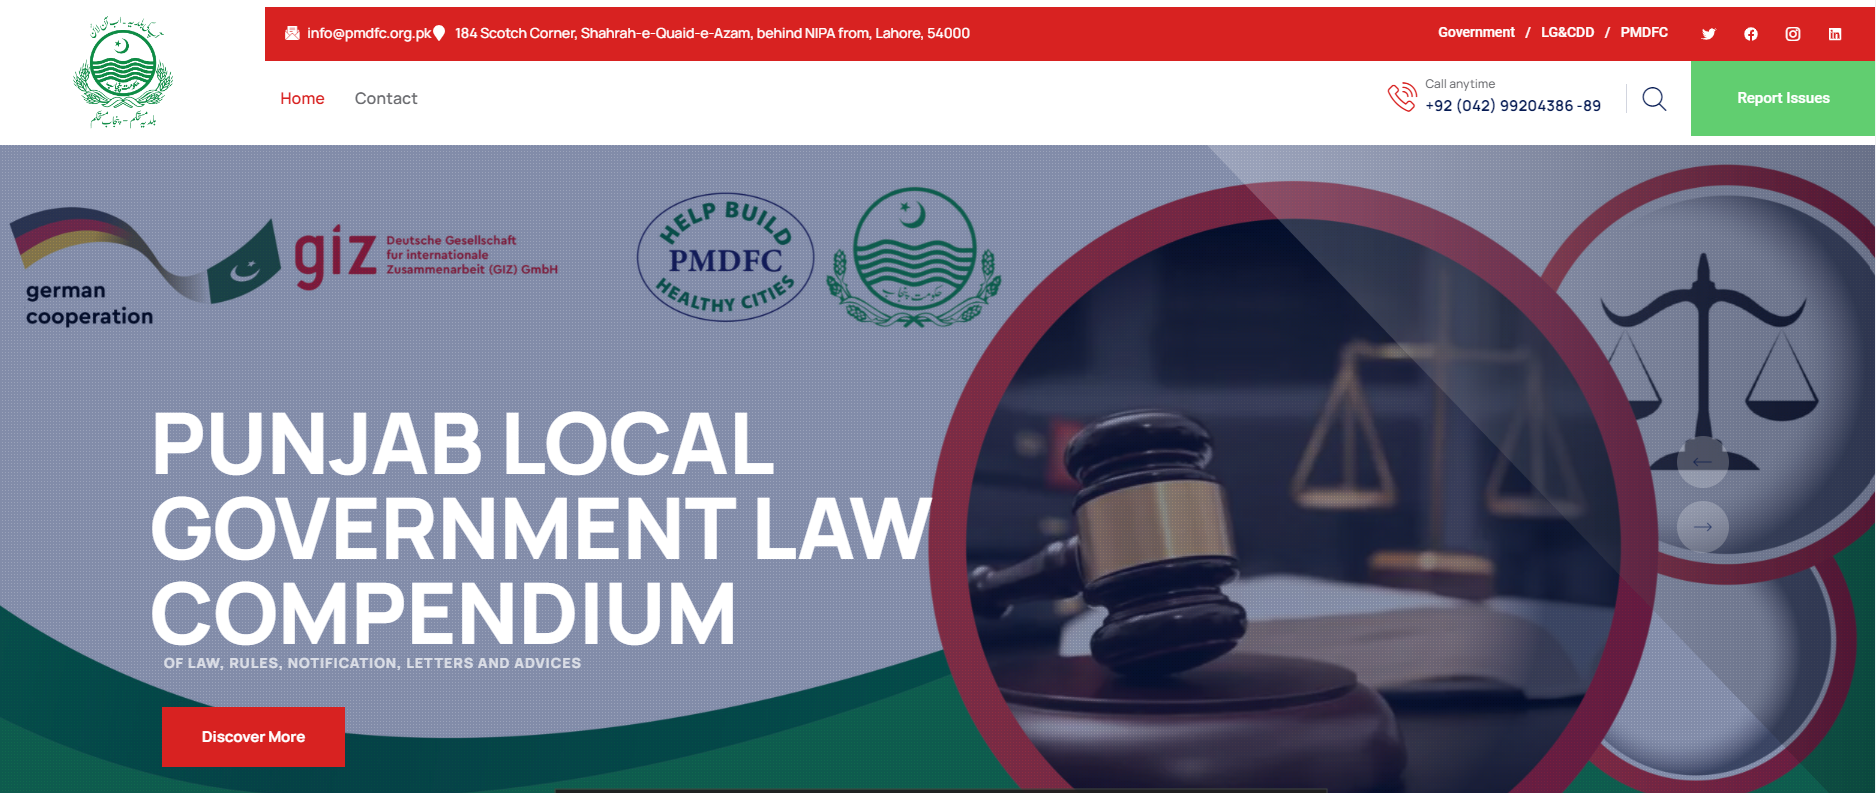 Punjab Local Government Compendium of Enforced Local Government Laws, Rules, Bye-laws, Government Instructions, Directions and Important Court Decisions 